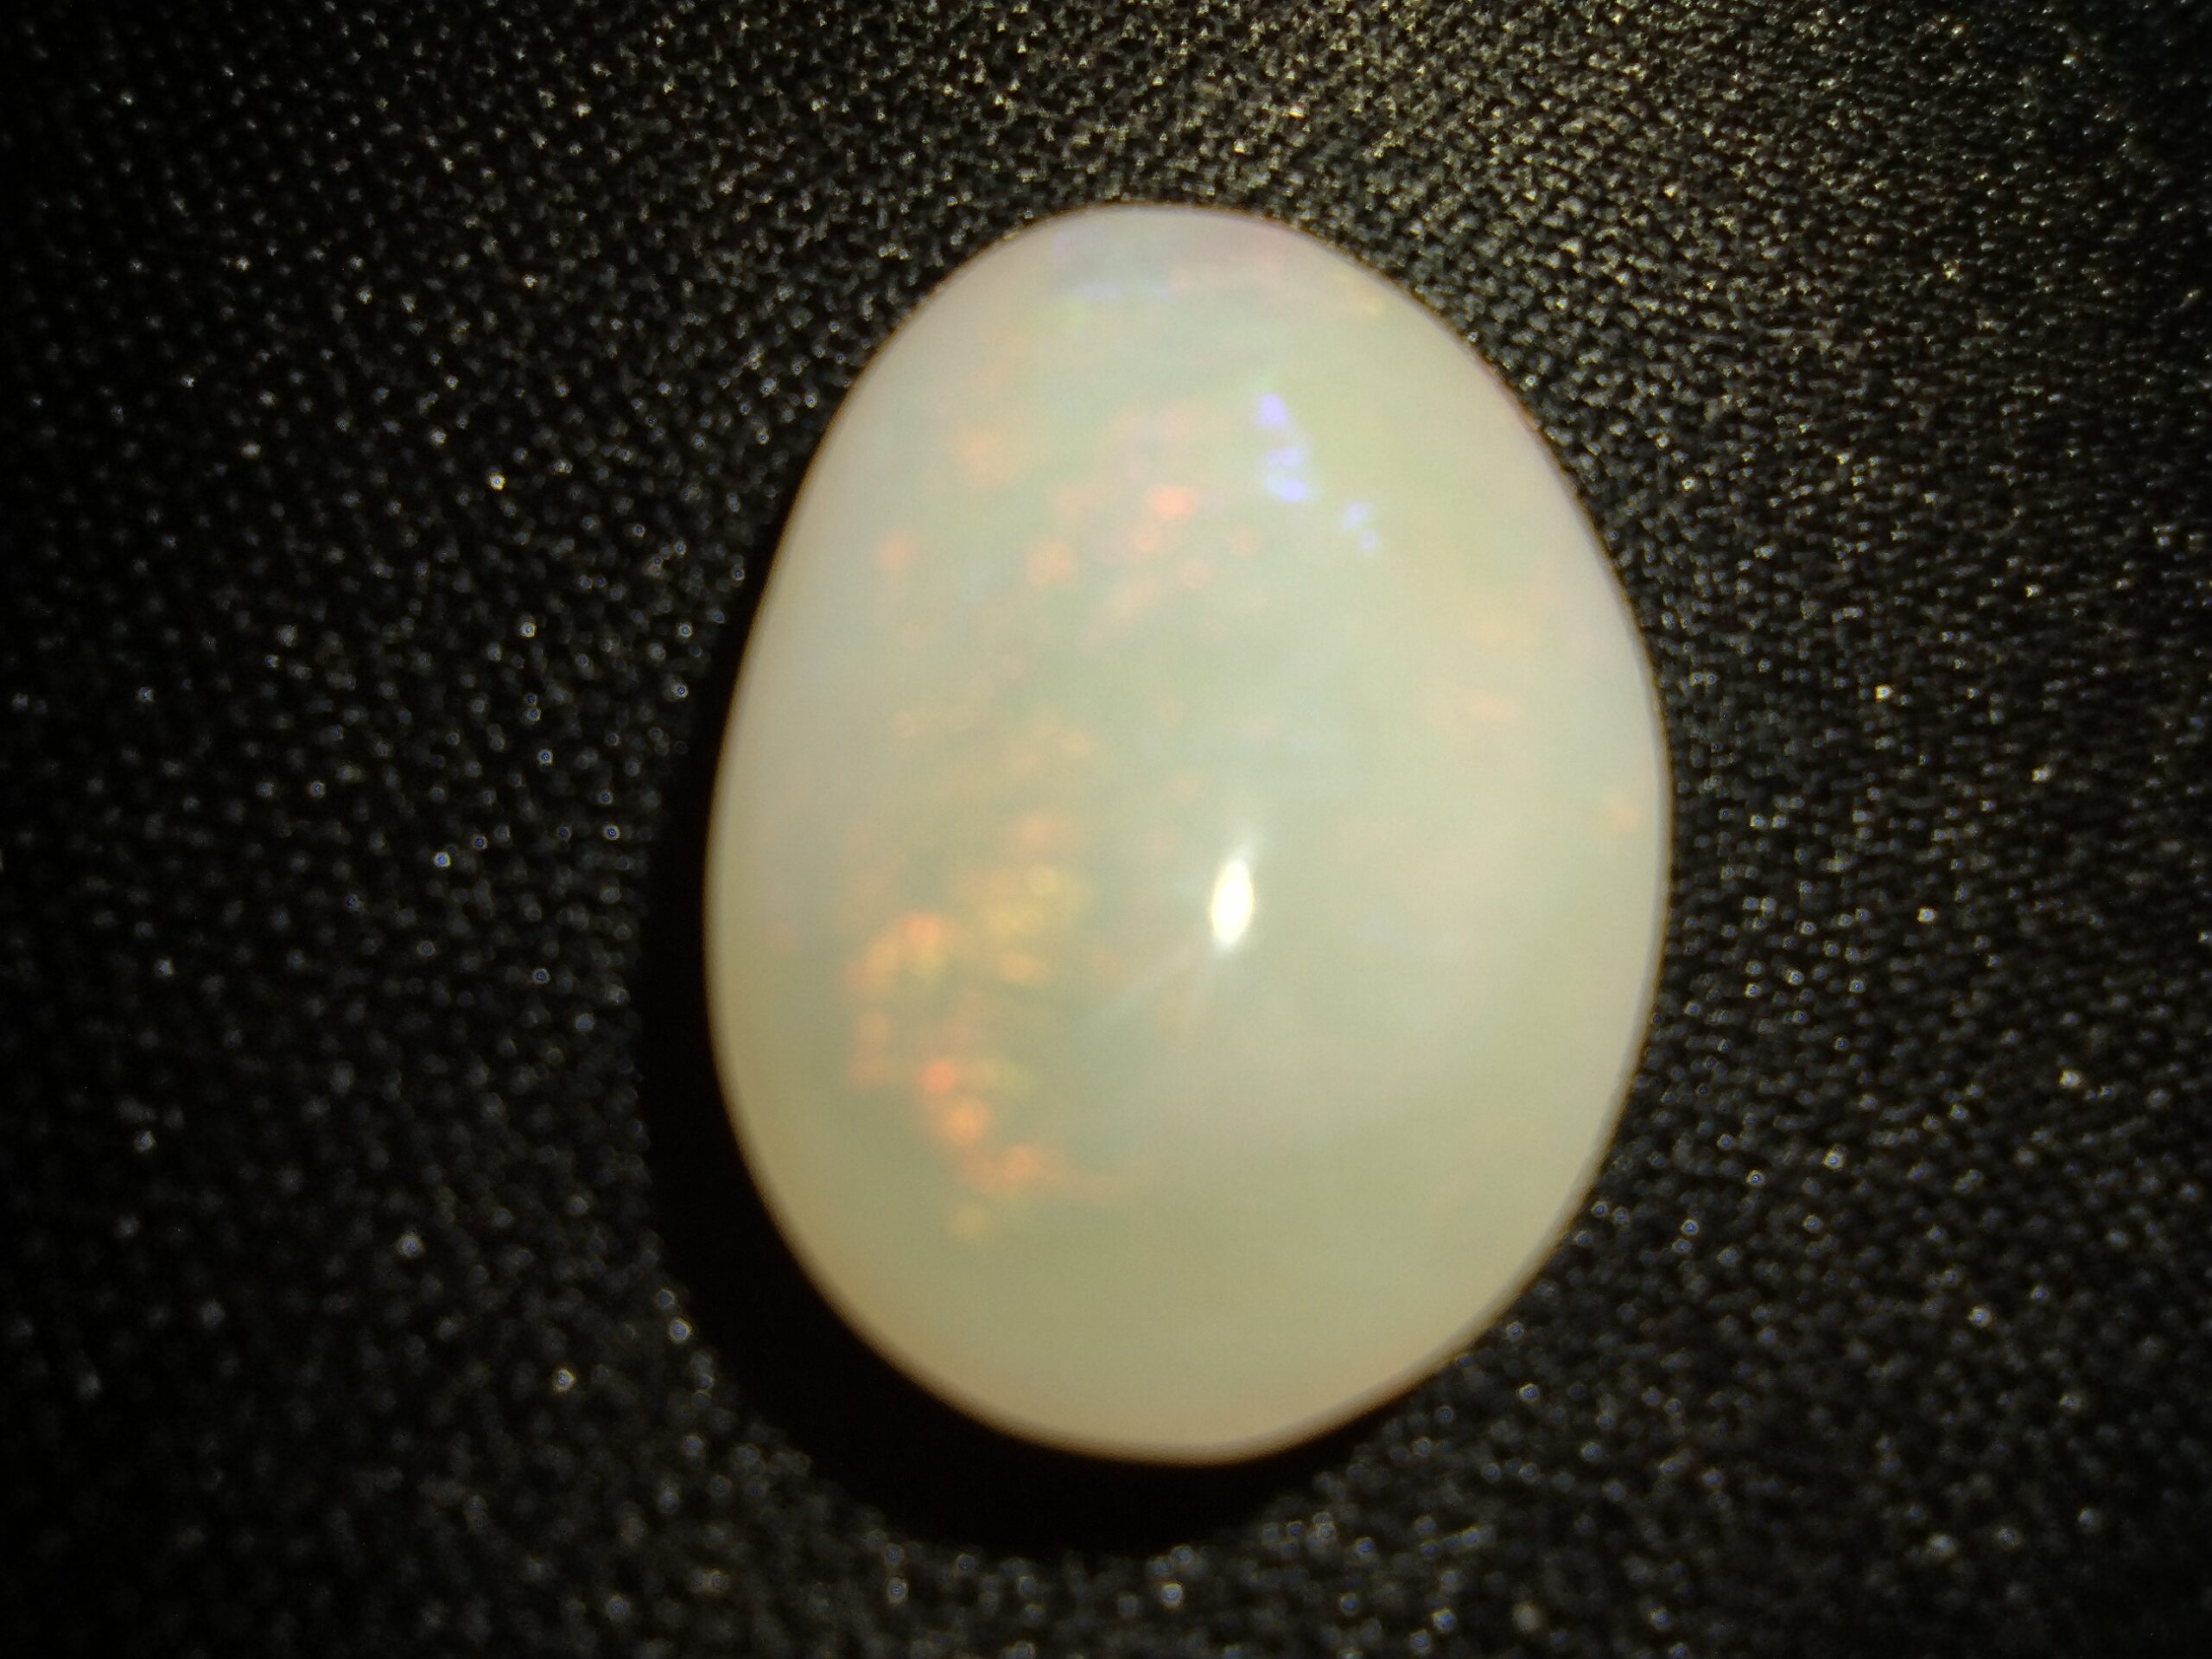 11 CT opal - Opal and gemstone collectors